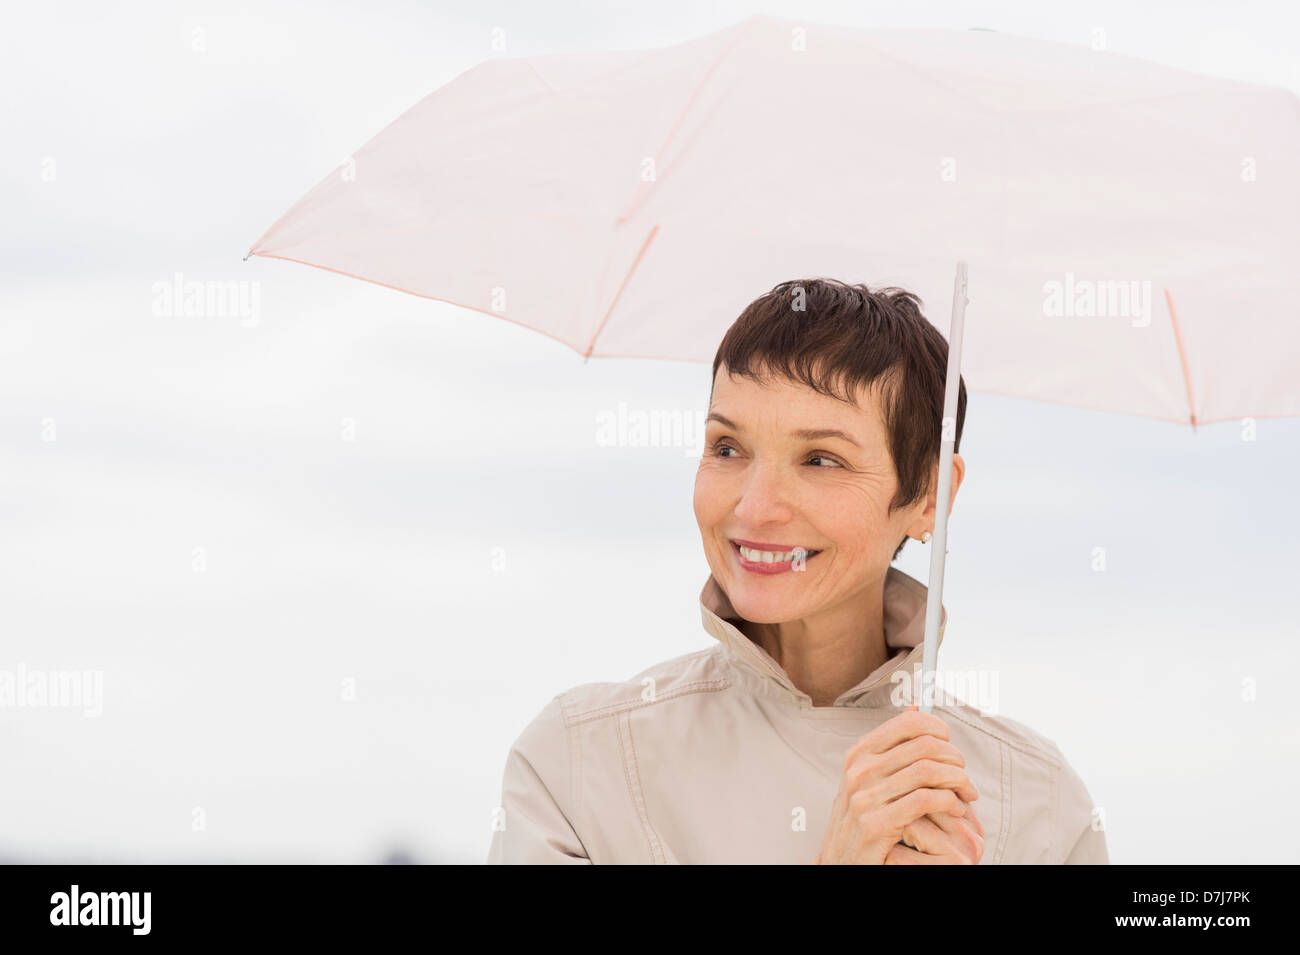 Portrait of smiling woman wearing raincoat and holding umbrella Stock Photo